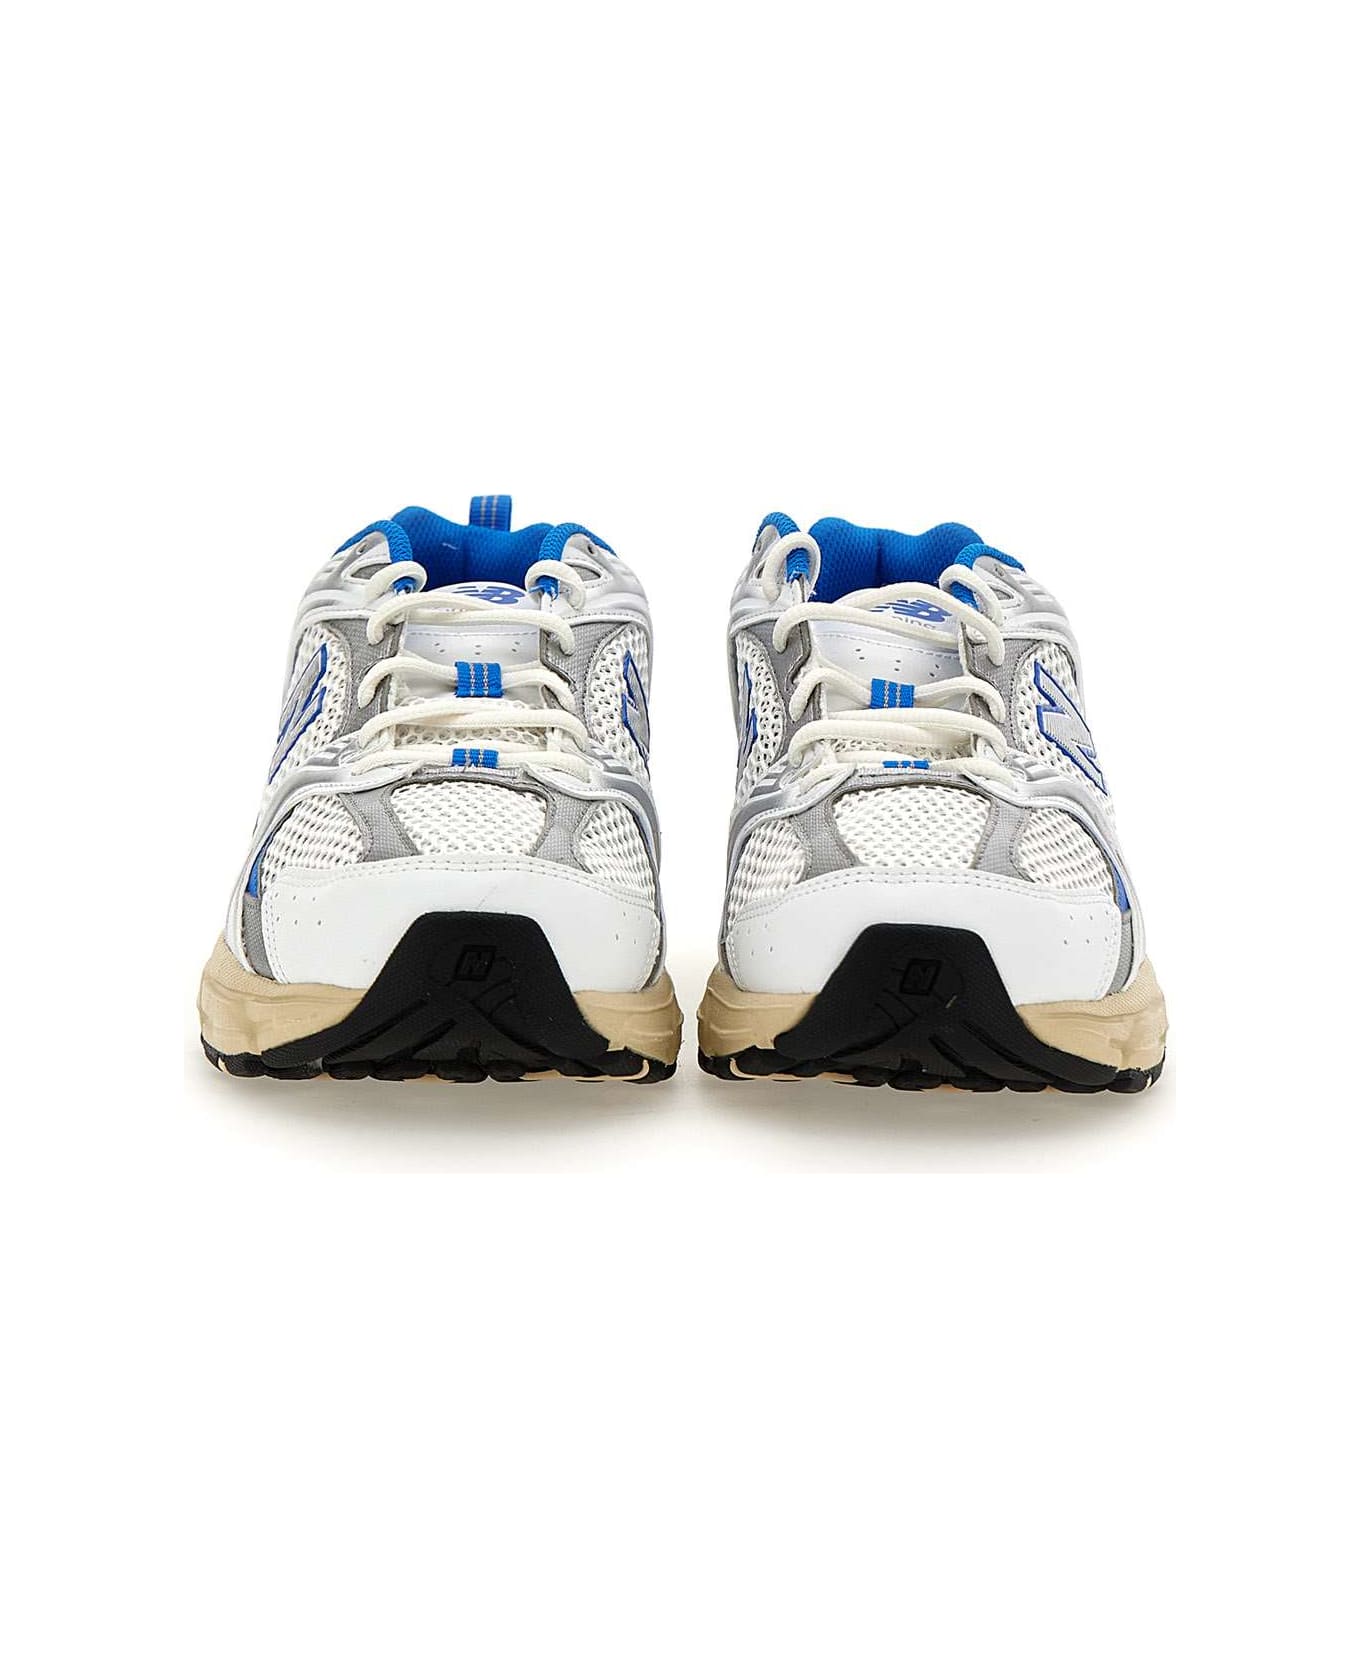 New Balance "mr530" Sneakers - WHITE-BLUE